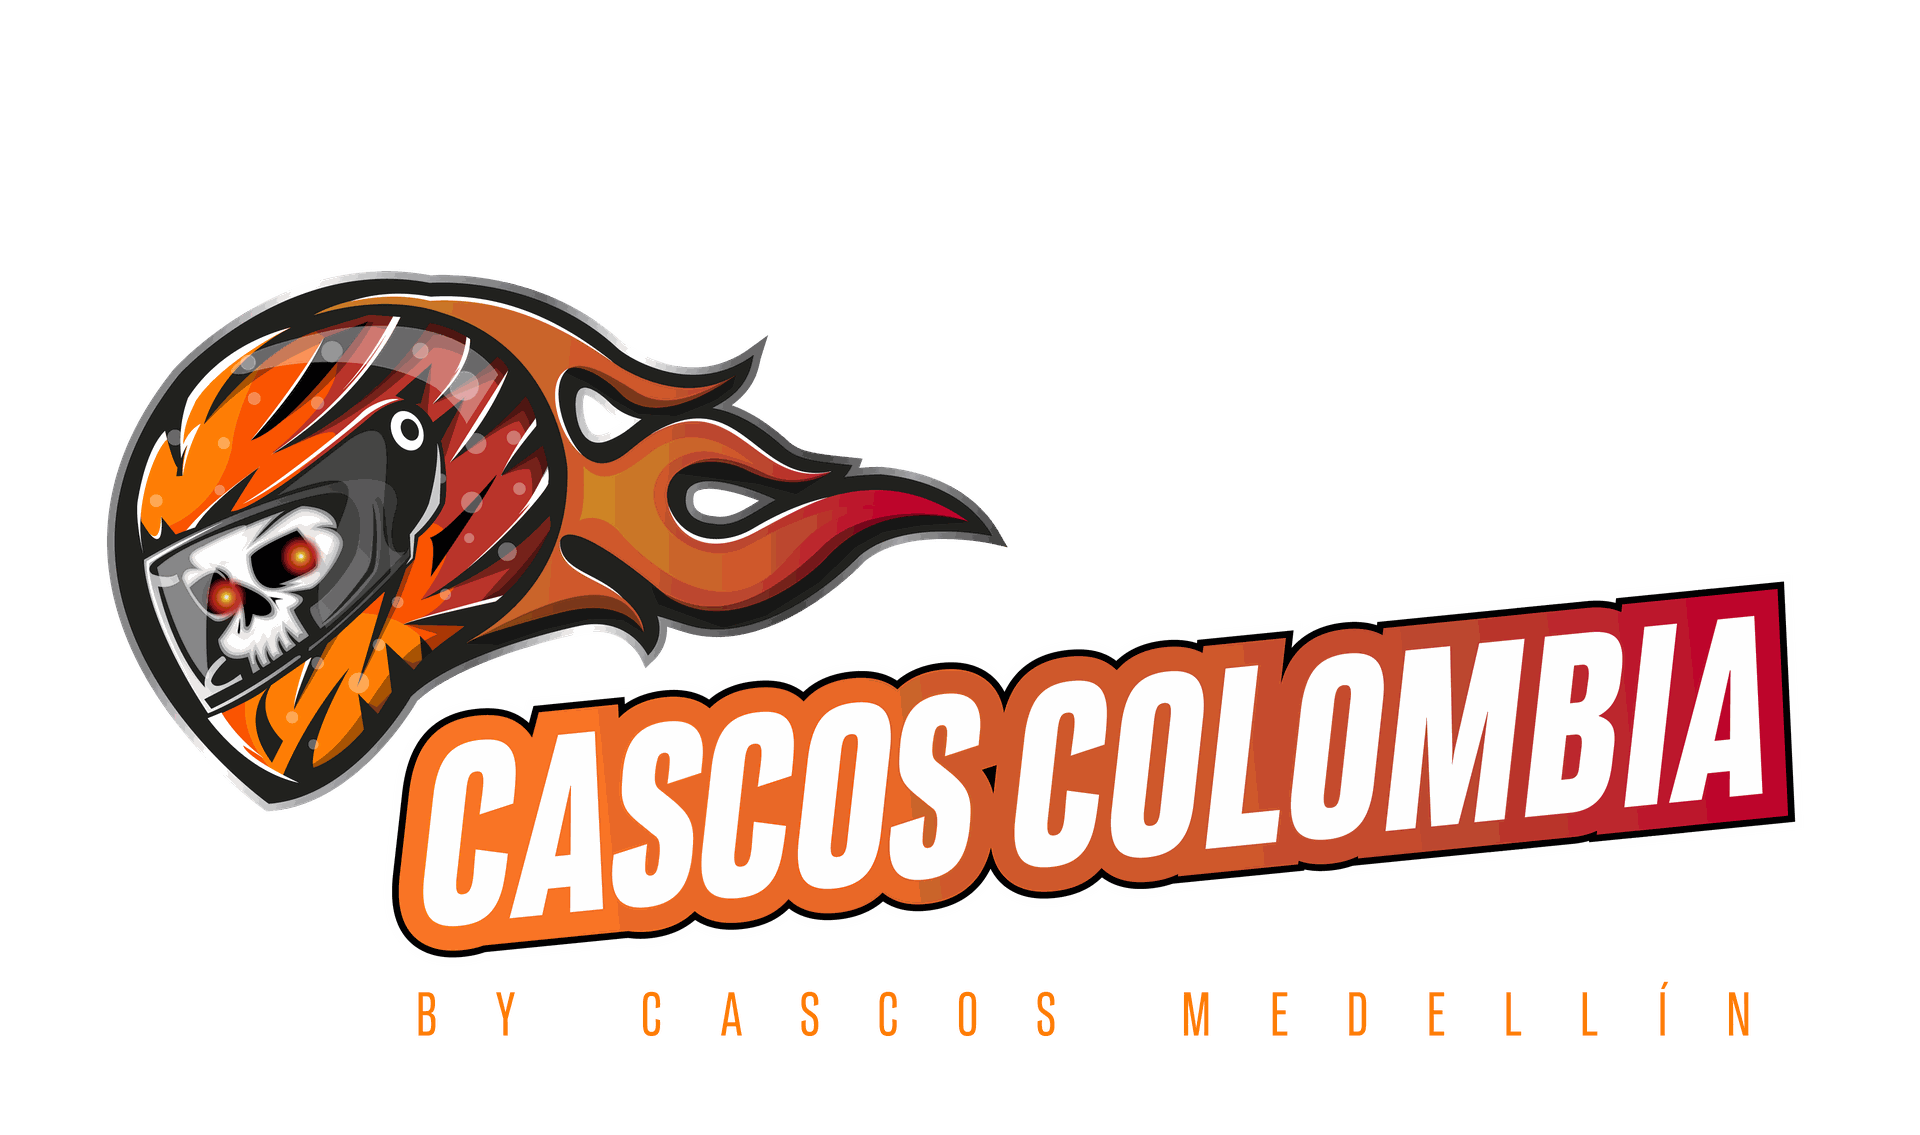 CASCOS COLOMBIA